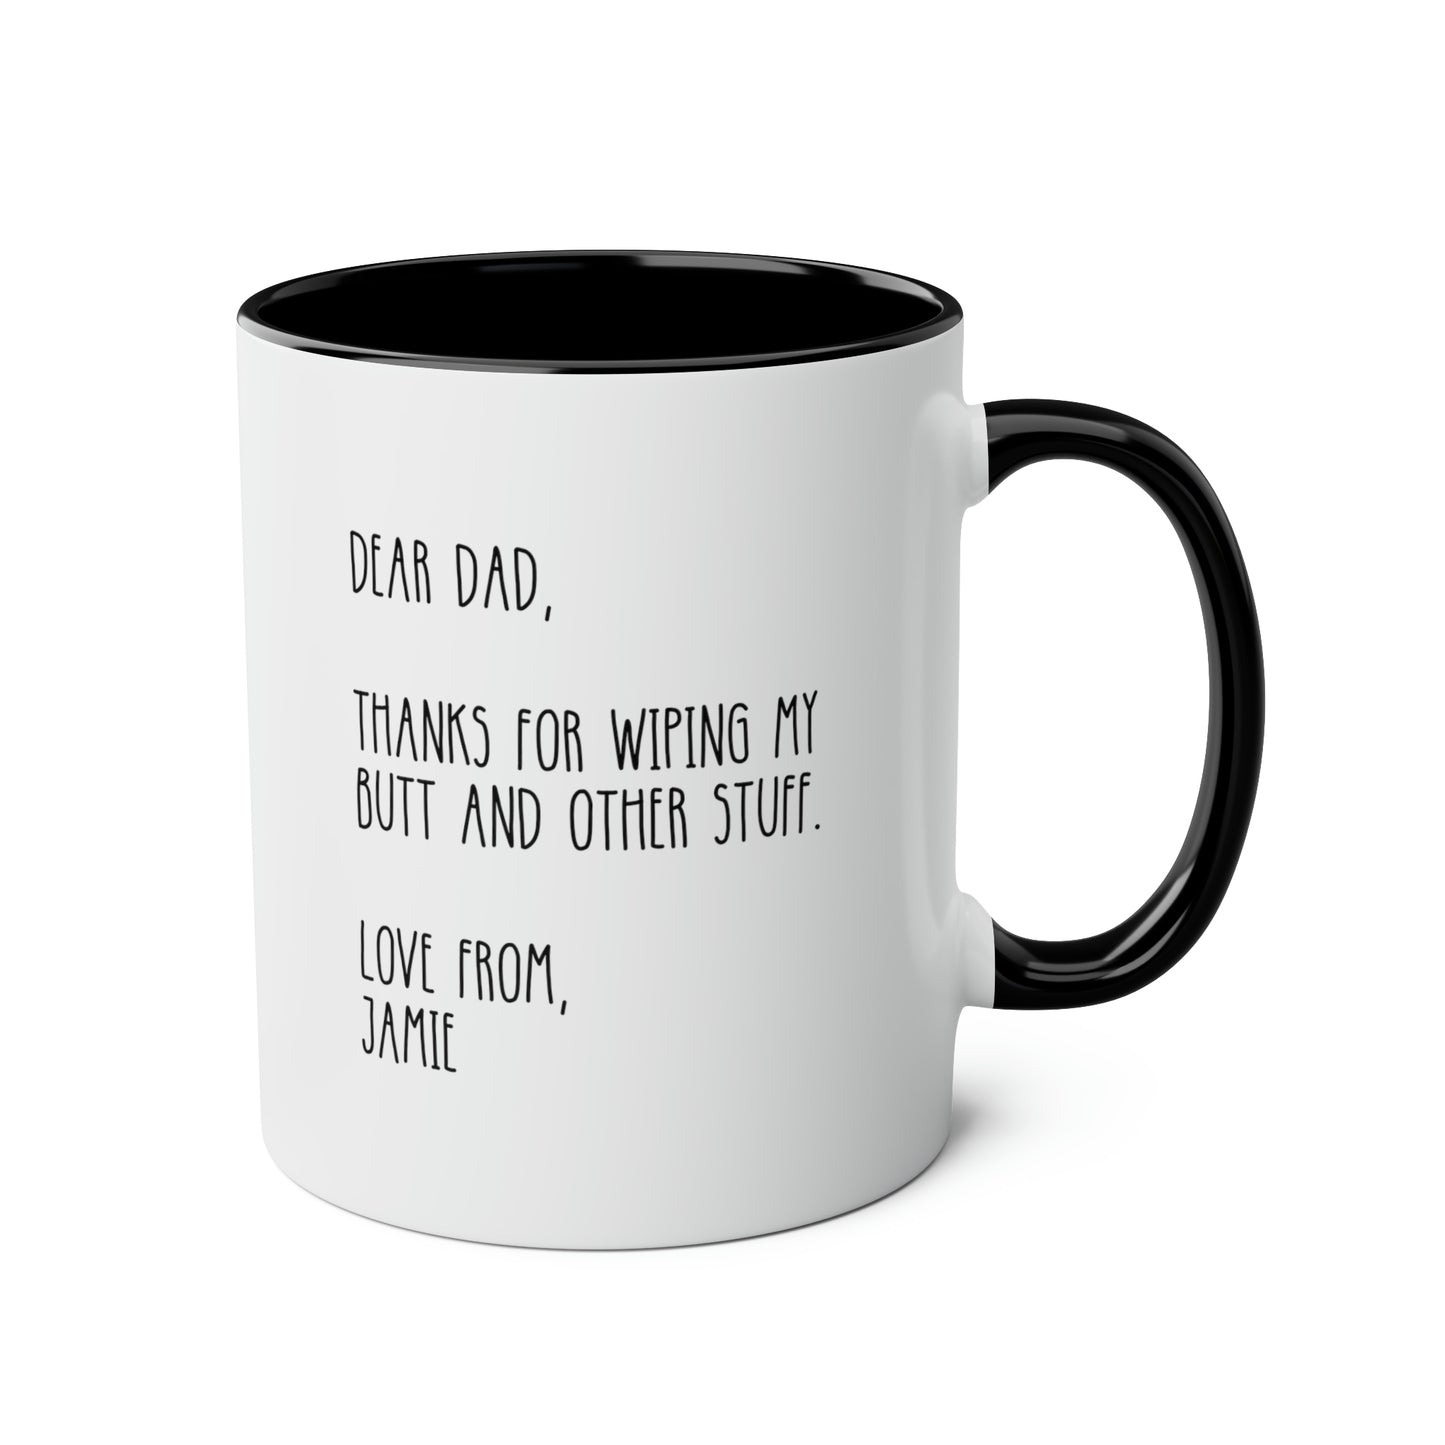 Dear Dad Thanks For Wiping My Butt And Other Stuff 11oz white with black accent funny large coffee mug gift for dad fathers day novelty gag papa custom name waveywares wavey wares wavywares wavy wares